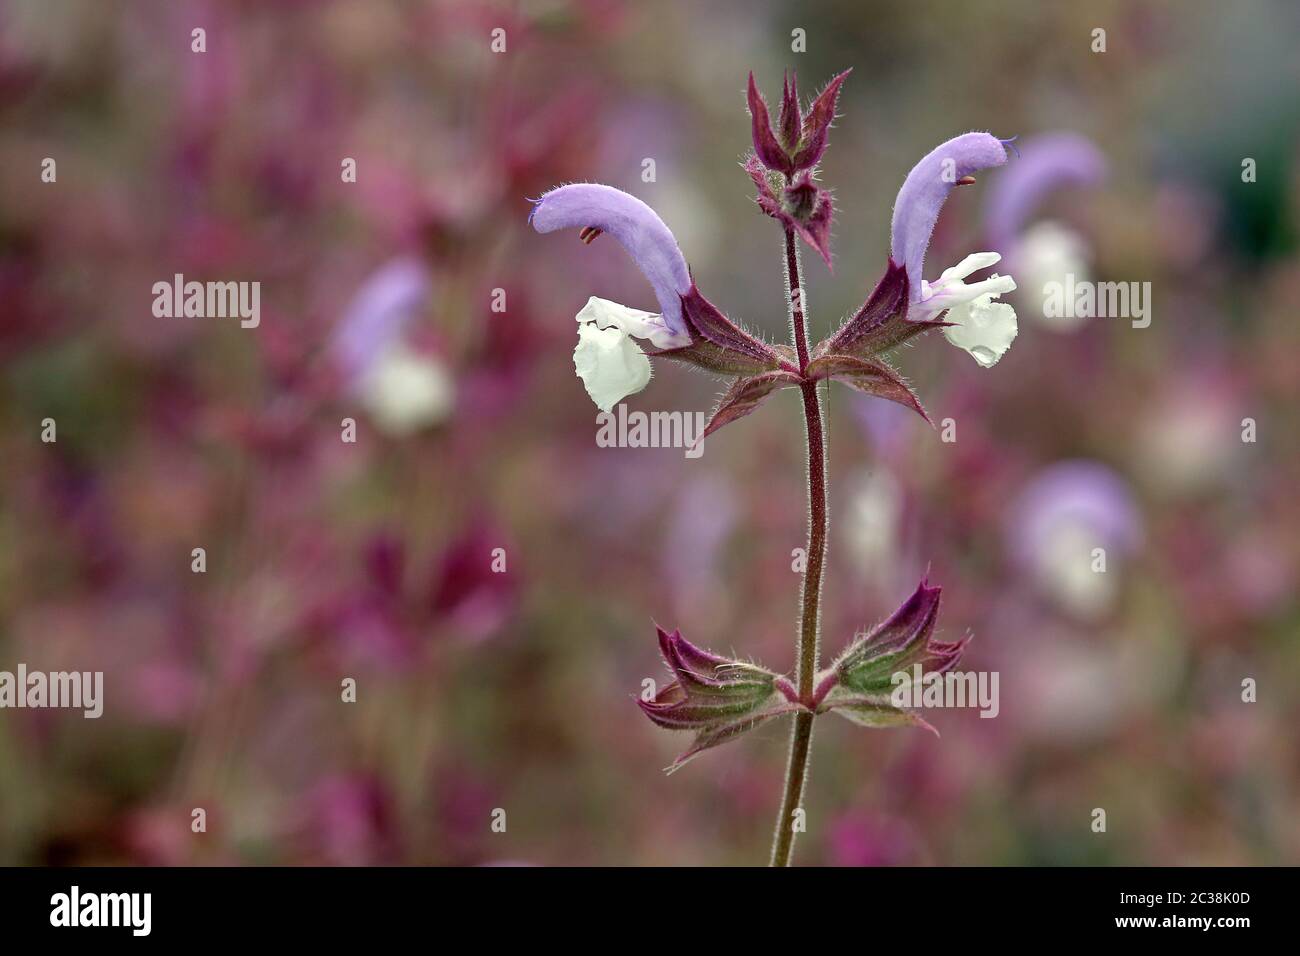 Flowers from The Muscat Sage Salvia sclarea Stock Photo